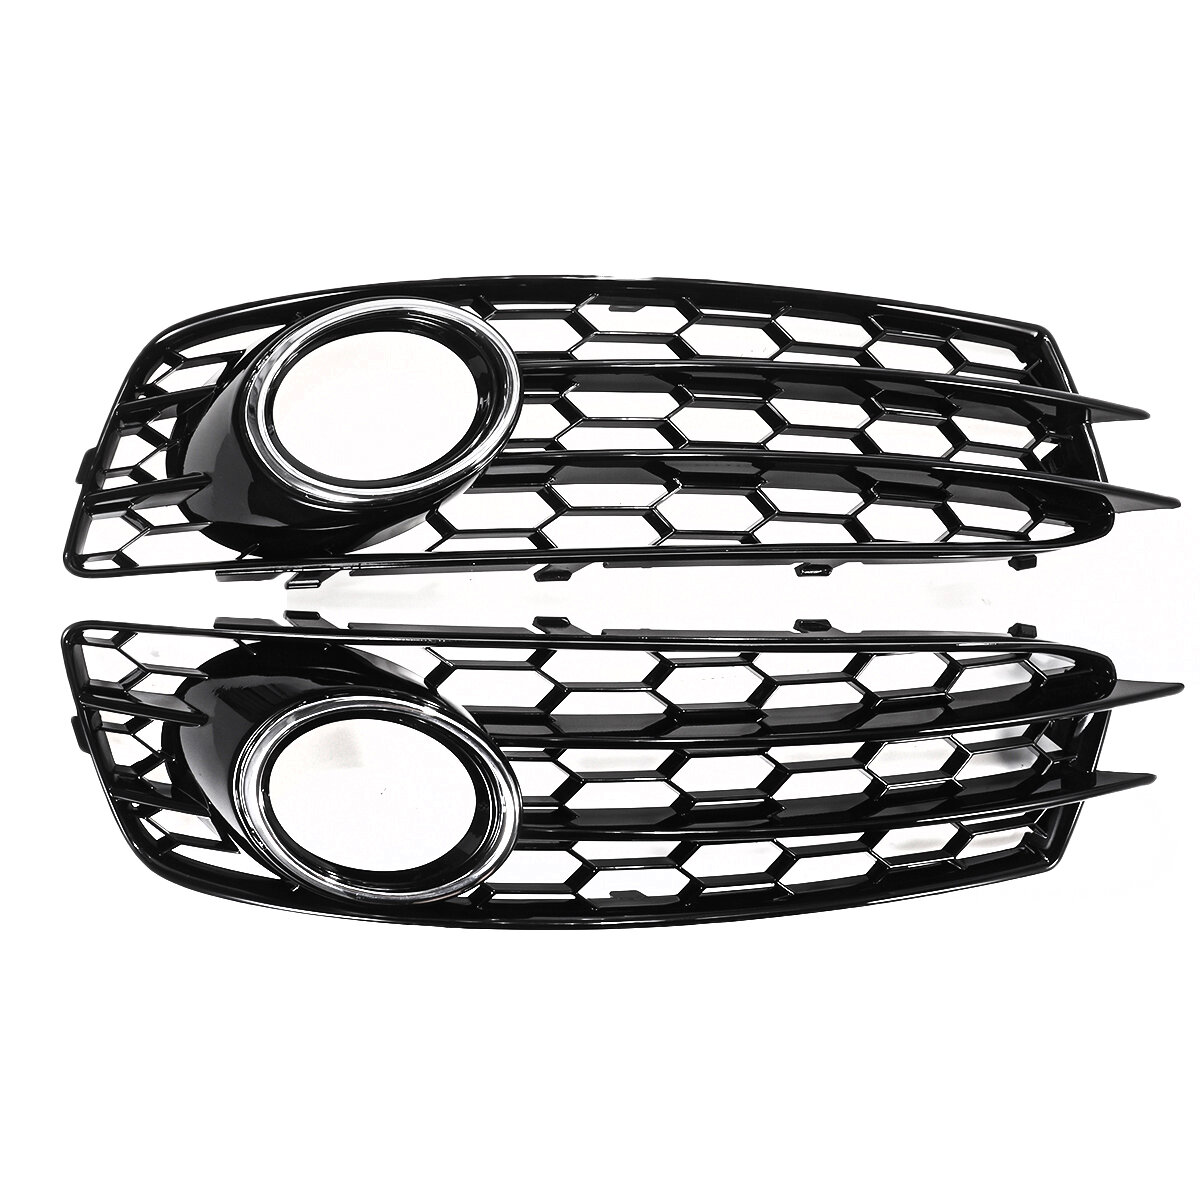 Image of Front Fog Light Lamp Grille Grill Cover Honeycomb HexChrome Silver For Audi A3 8P S-Line 2009-2012